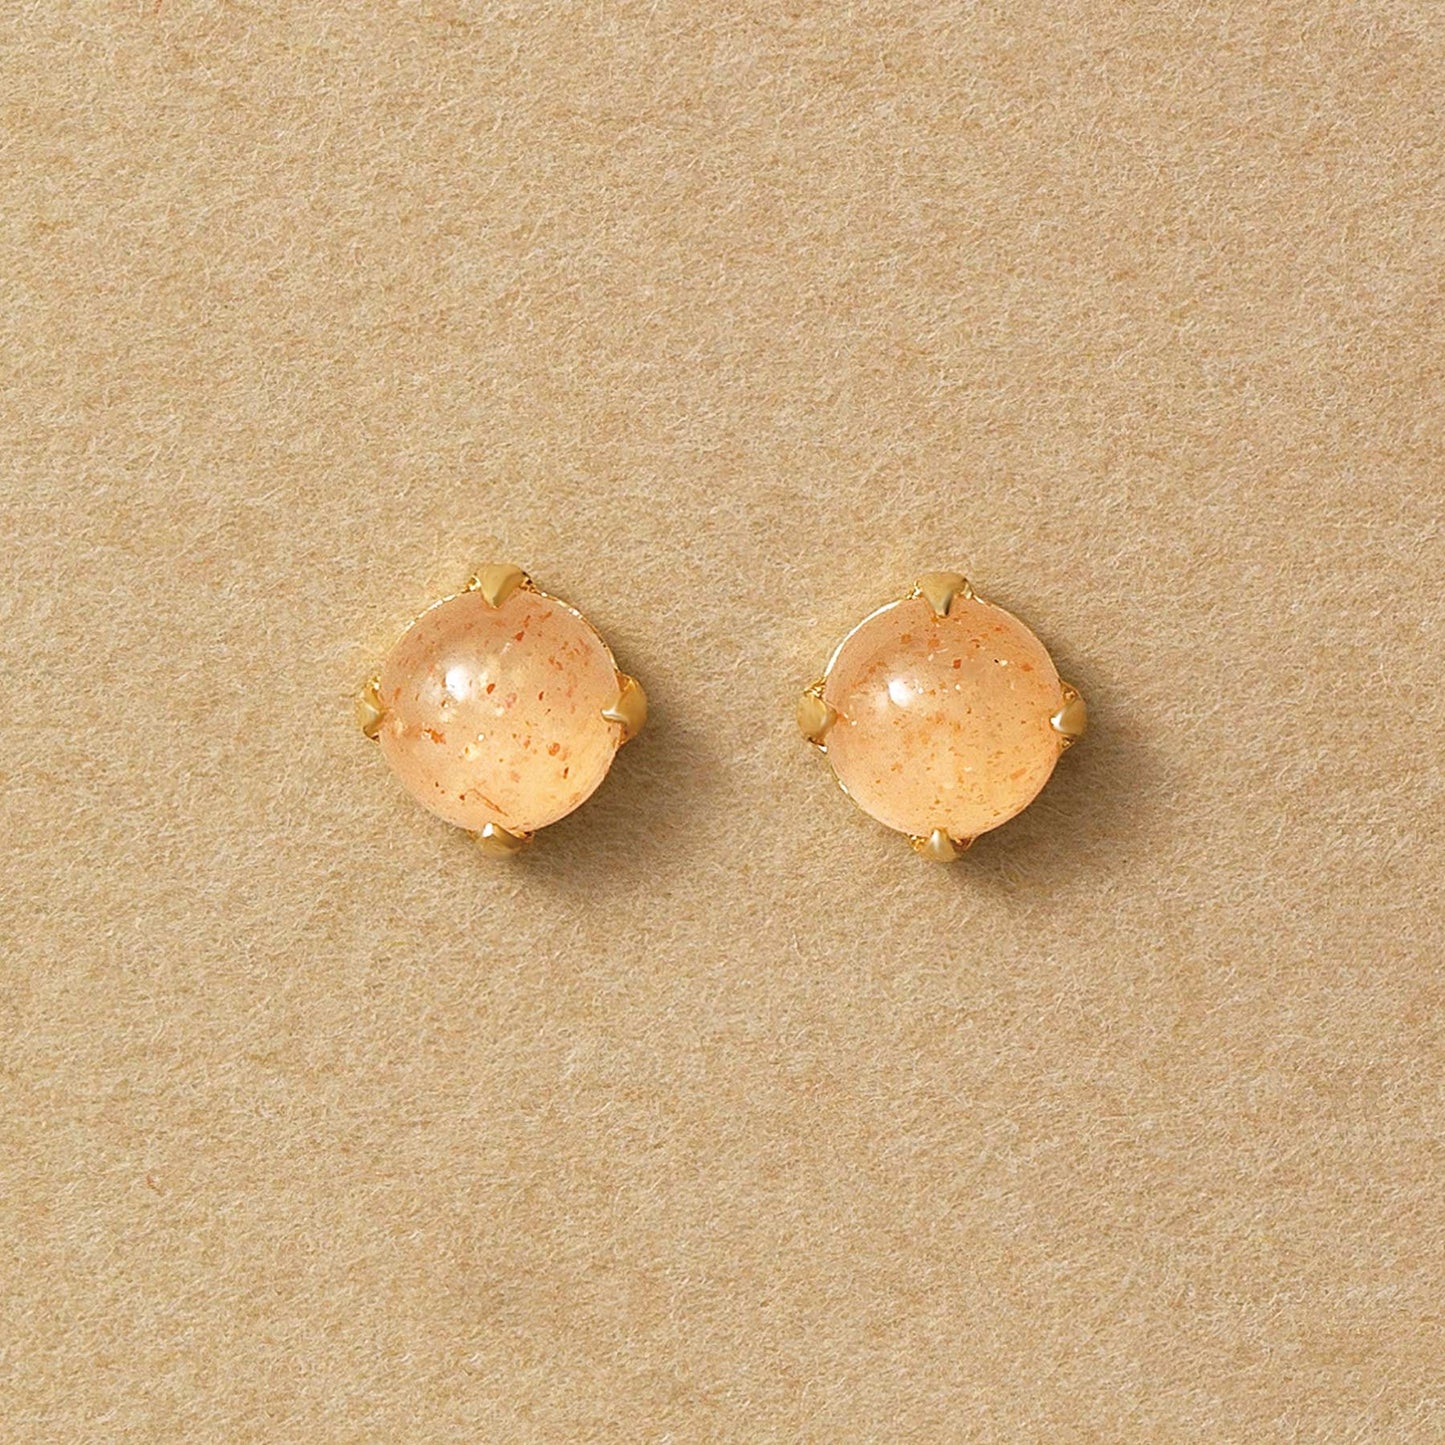 [Second Earrings] 18K Yellow Gold Orange Moonstone Cabochon Earrings - Product Image